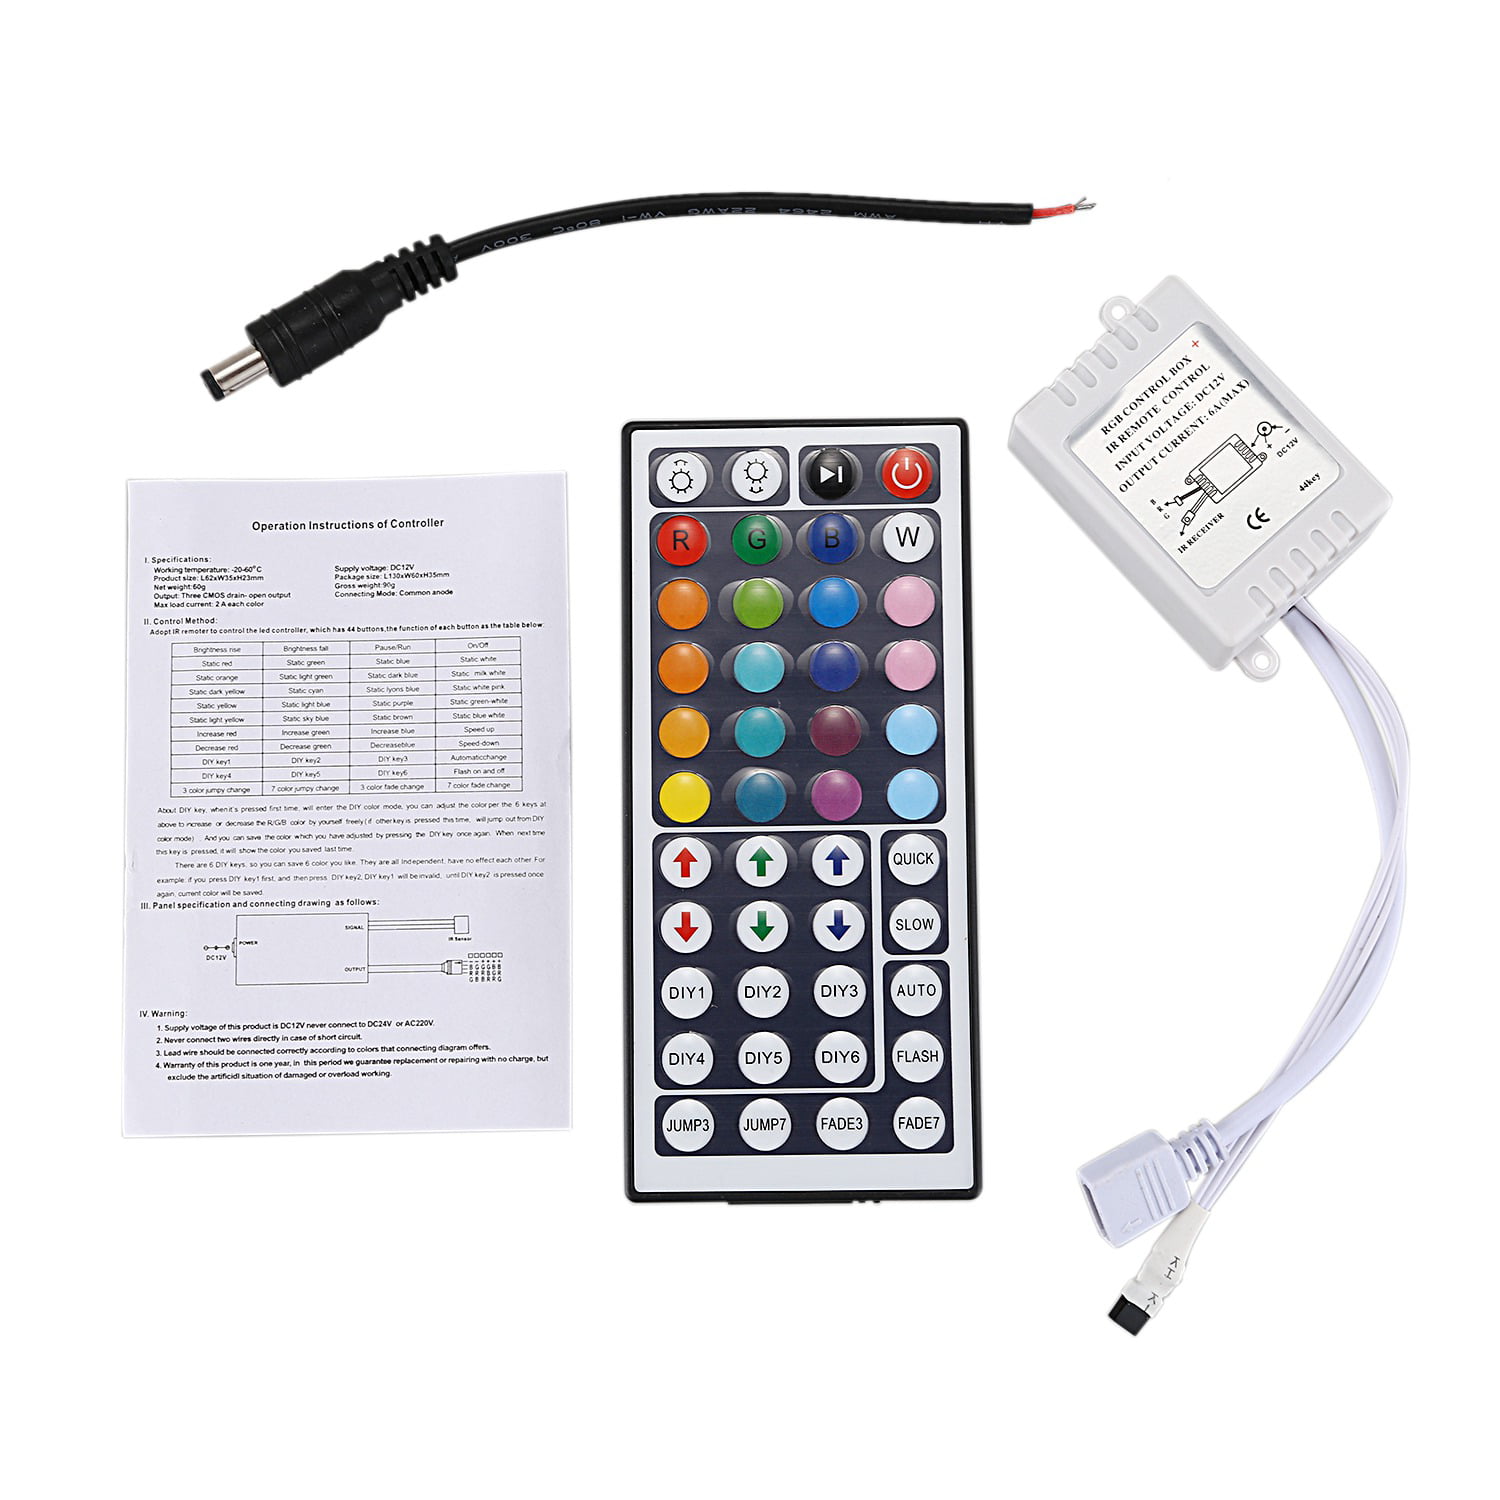 Details about   44 Key IR Infrared Remote Control Wireless Controller RGB 3528 5050 LED Strip 